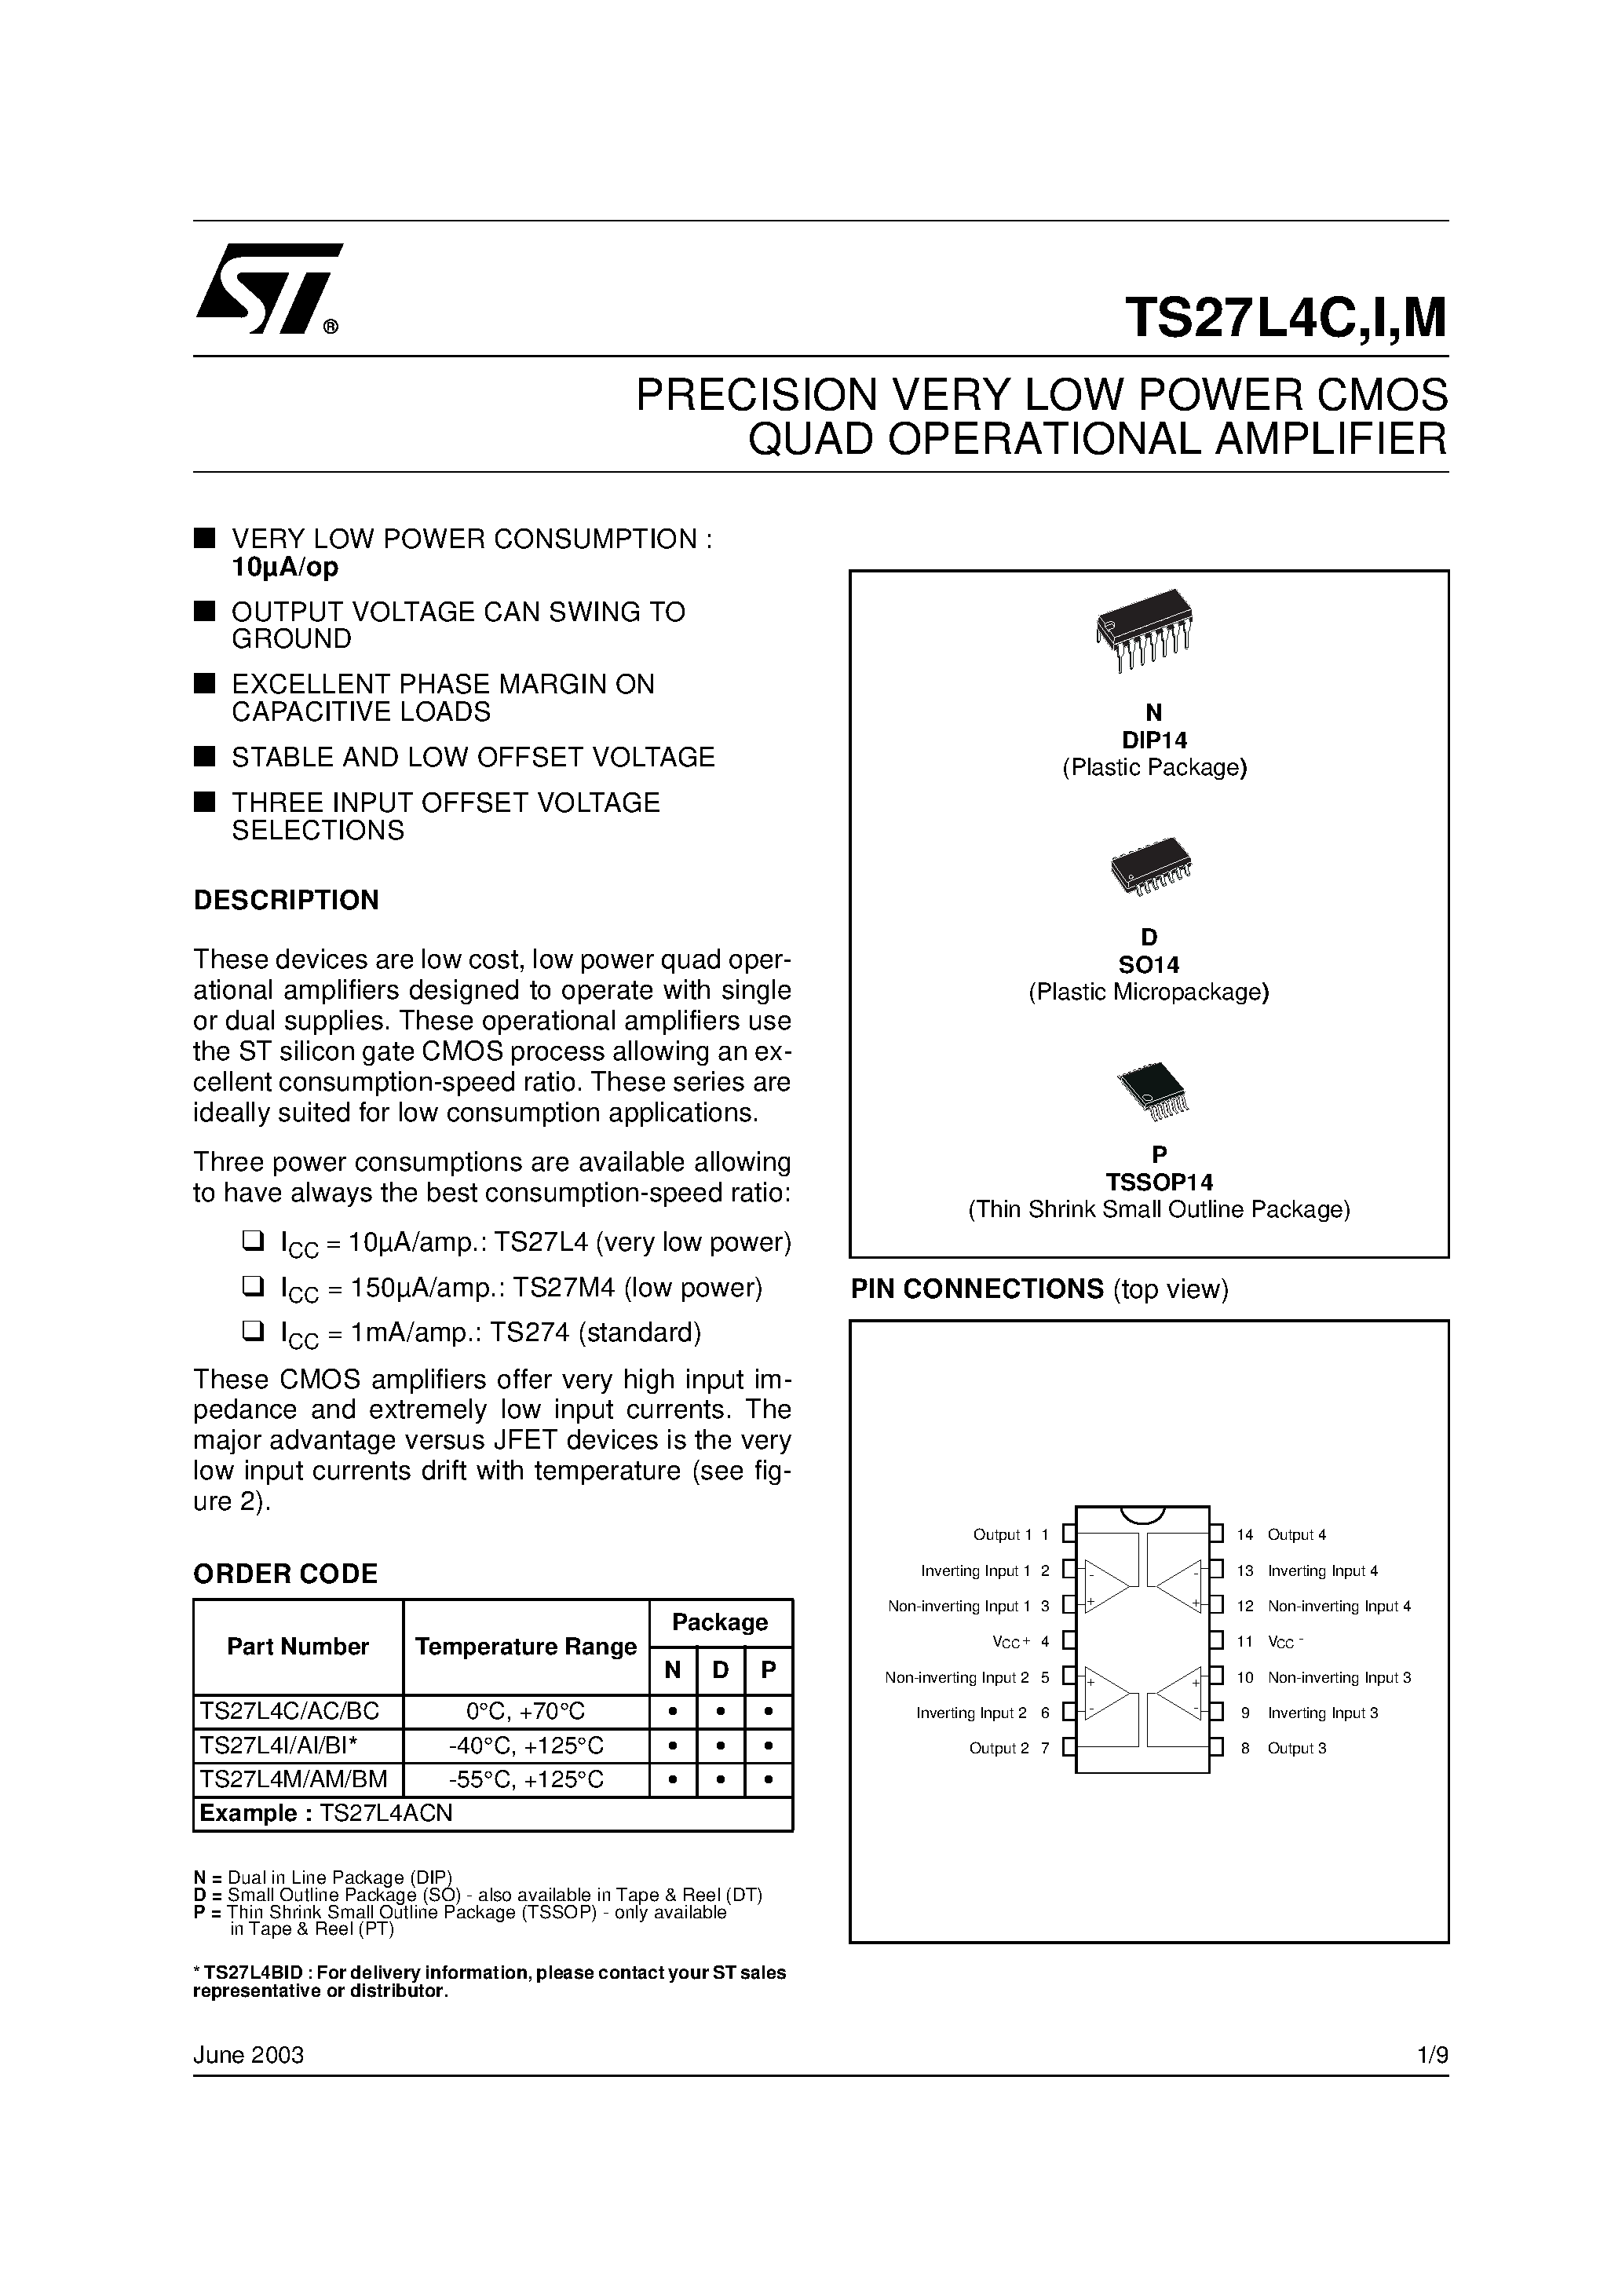 Datasheet TS27L4AC - PRECISION VERY LOW POWER CMOS QUAD OPERATIONAL AMPLIFIER page 1